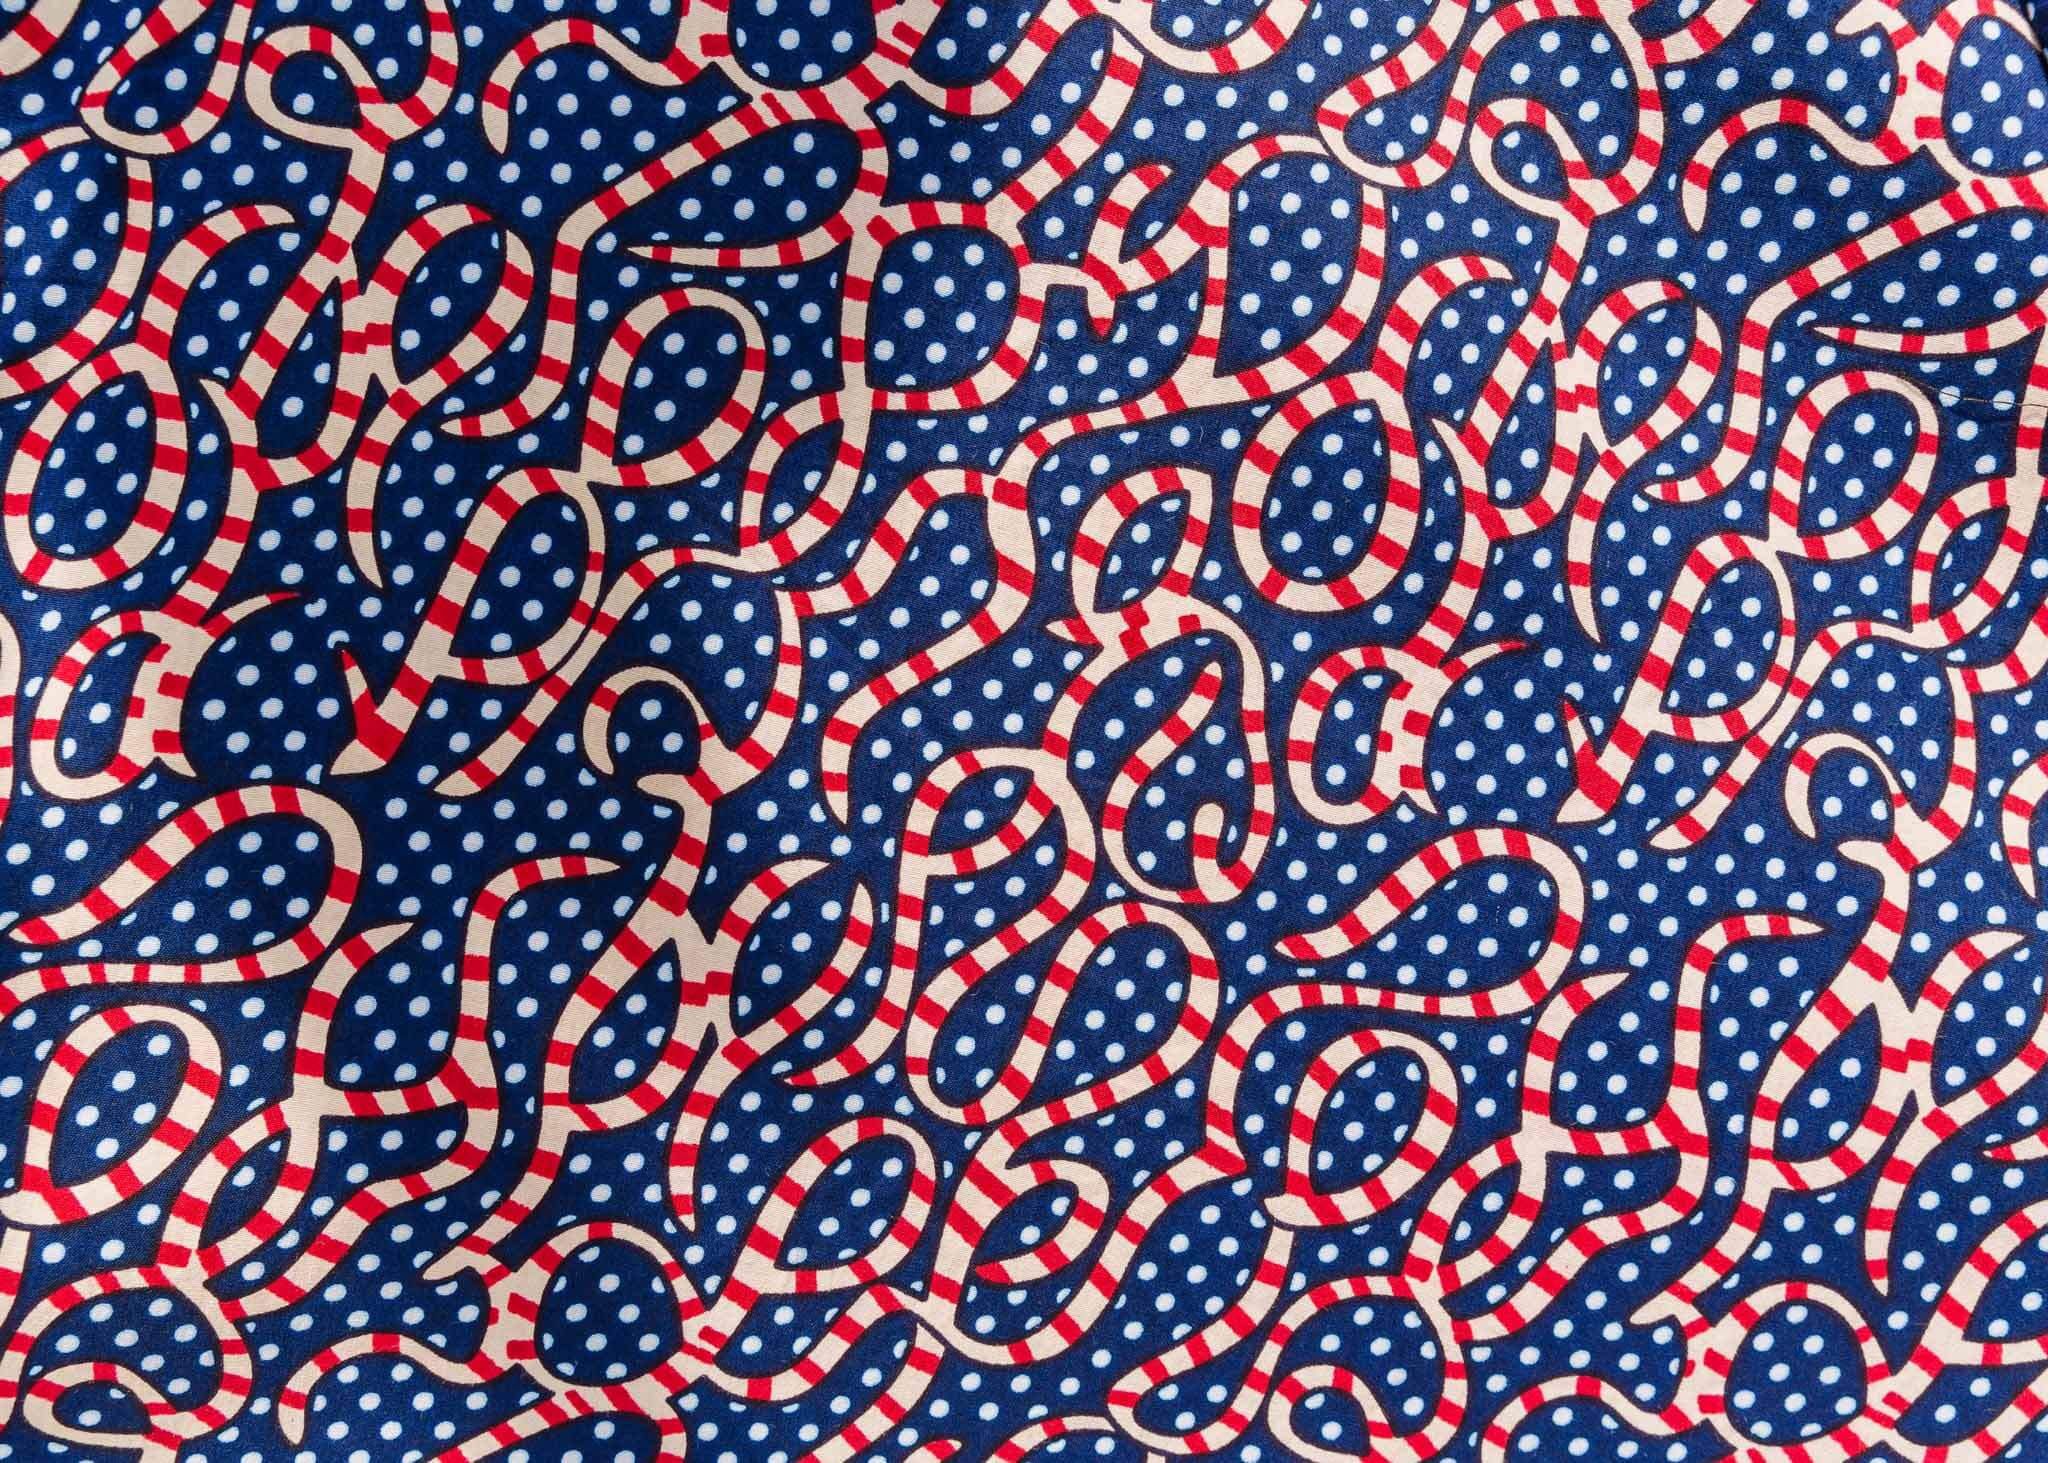 display of blue and red ribbon print dress.